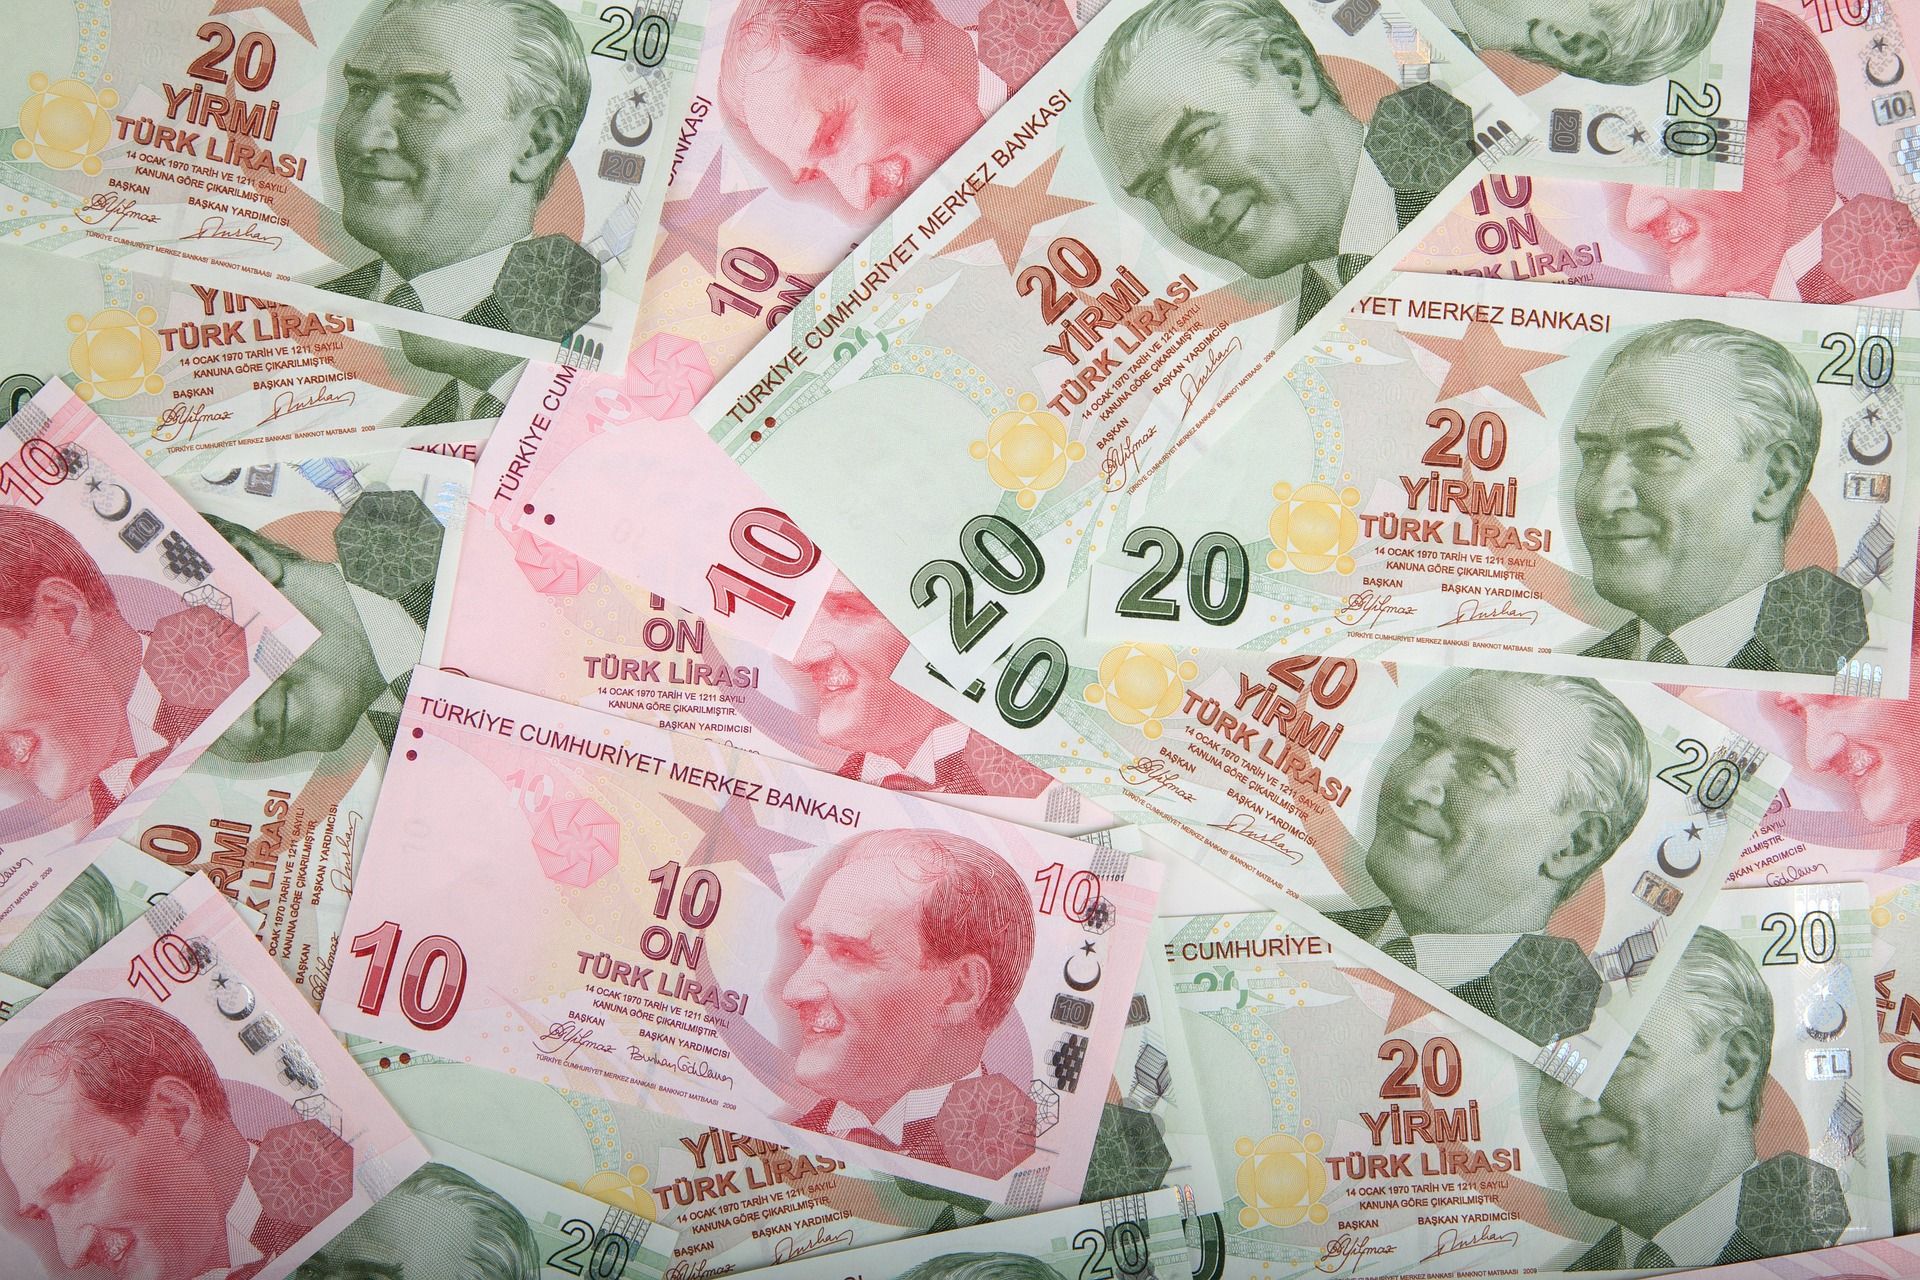 Turkey inflation jumps to 24-year high of 85.5% after interest rate cuts